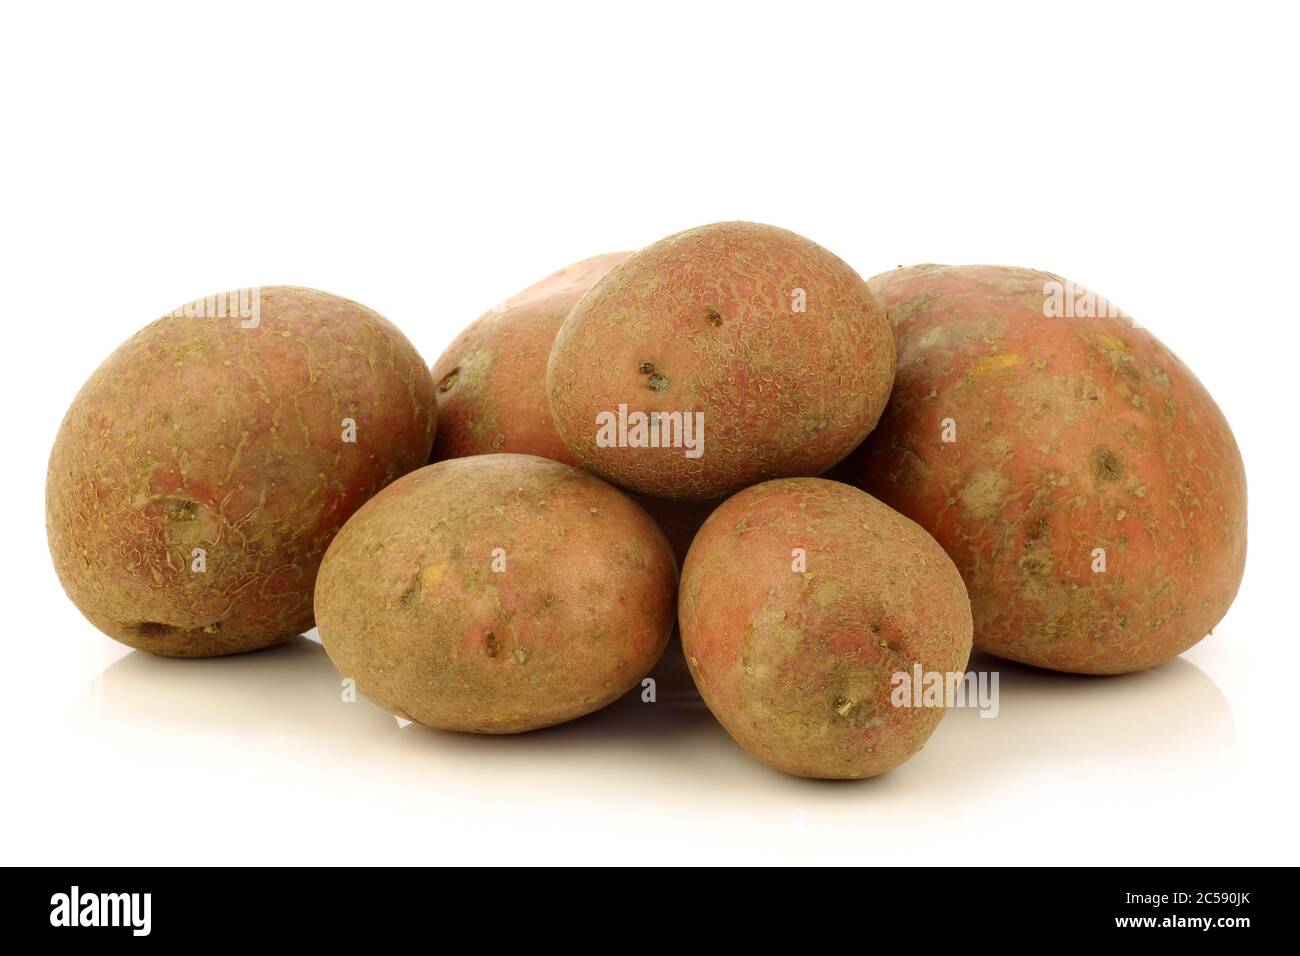 freshly harvested dutch potatoes called 'Bildtstar' and a peeled one on a white background Stock Photo